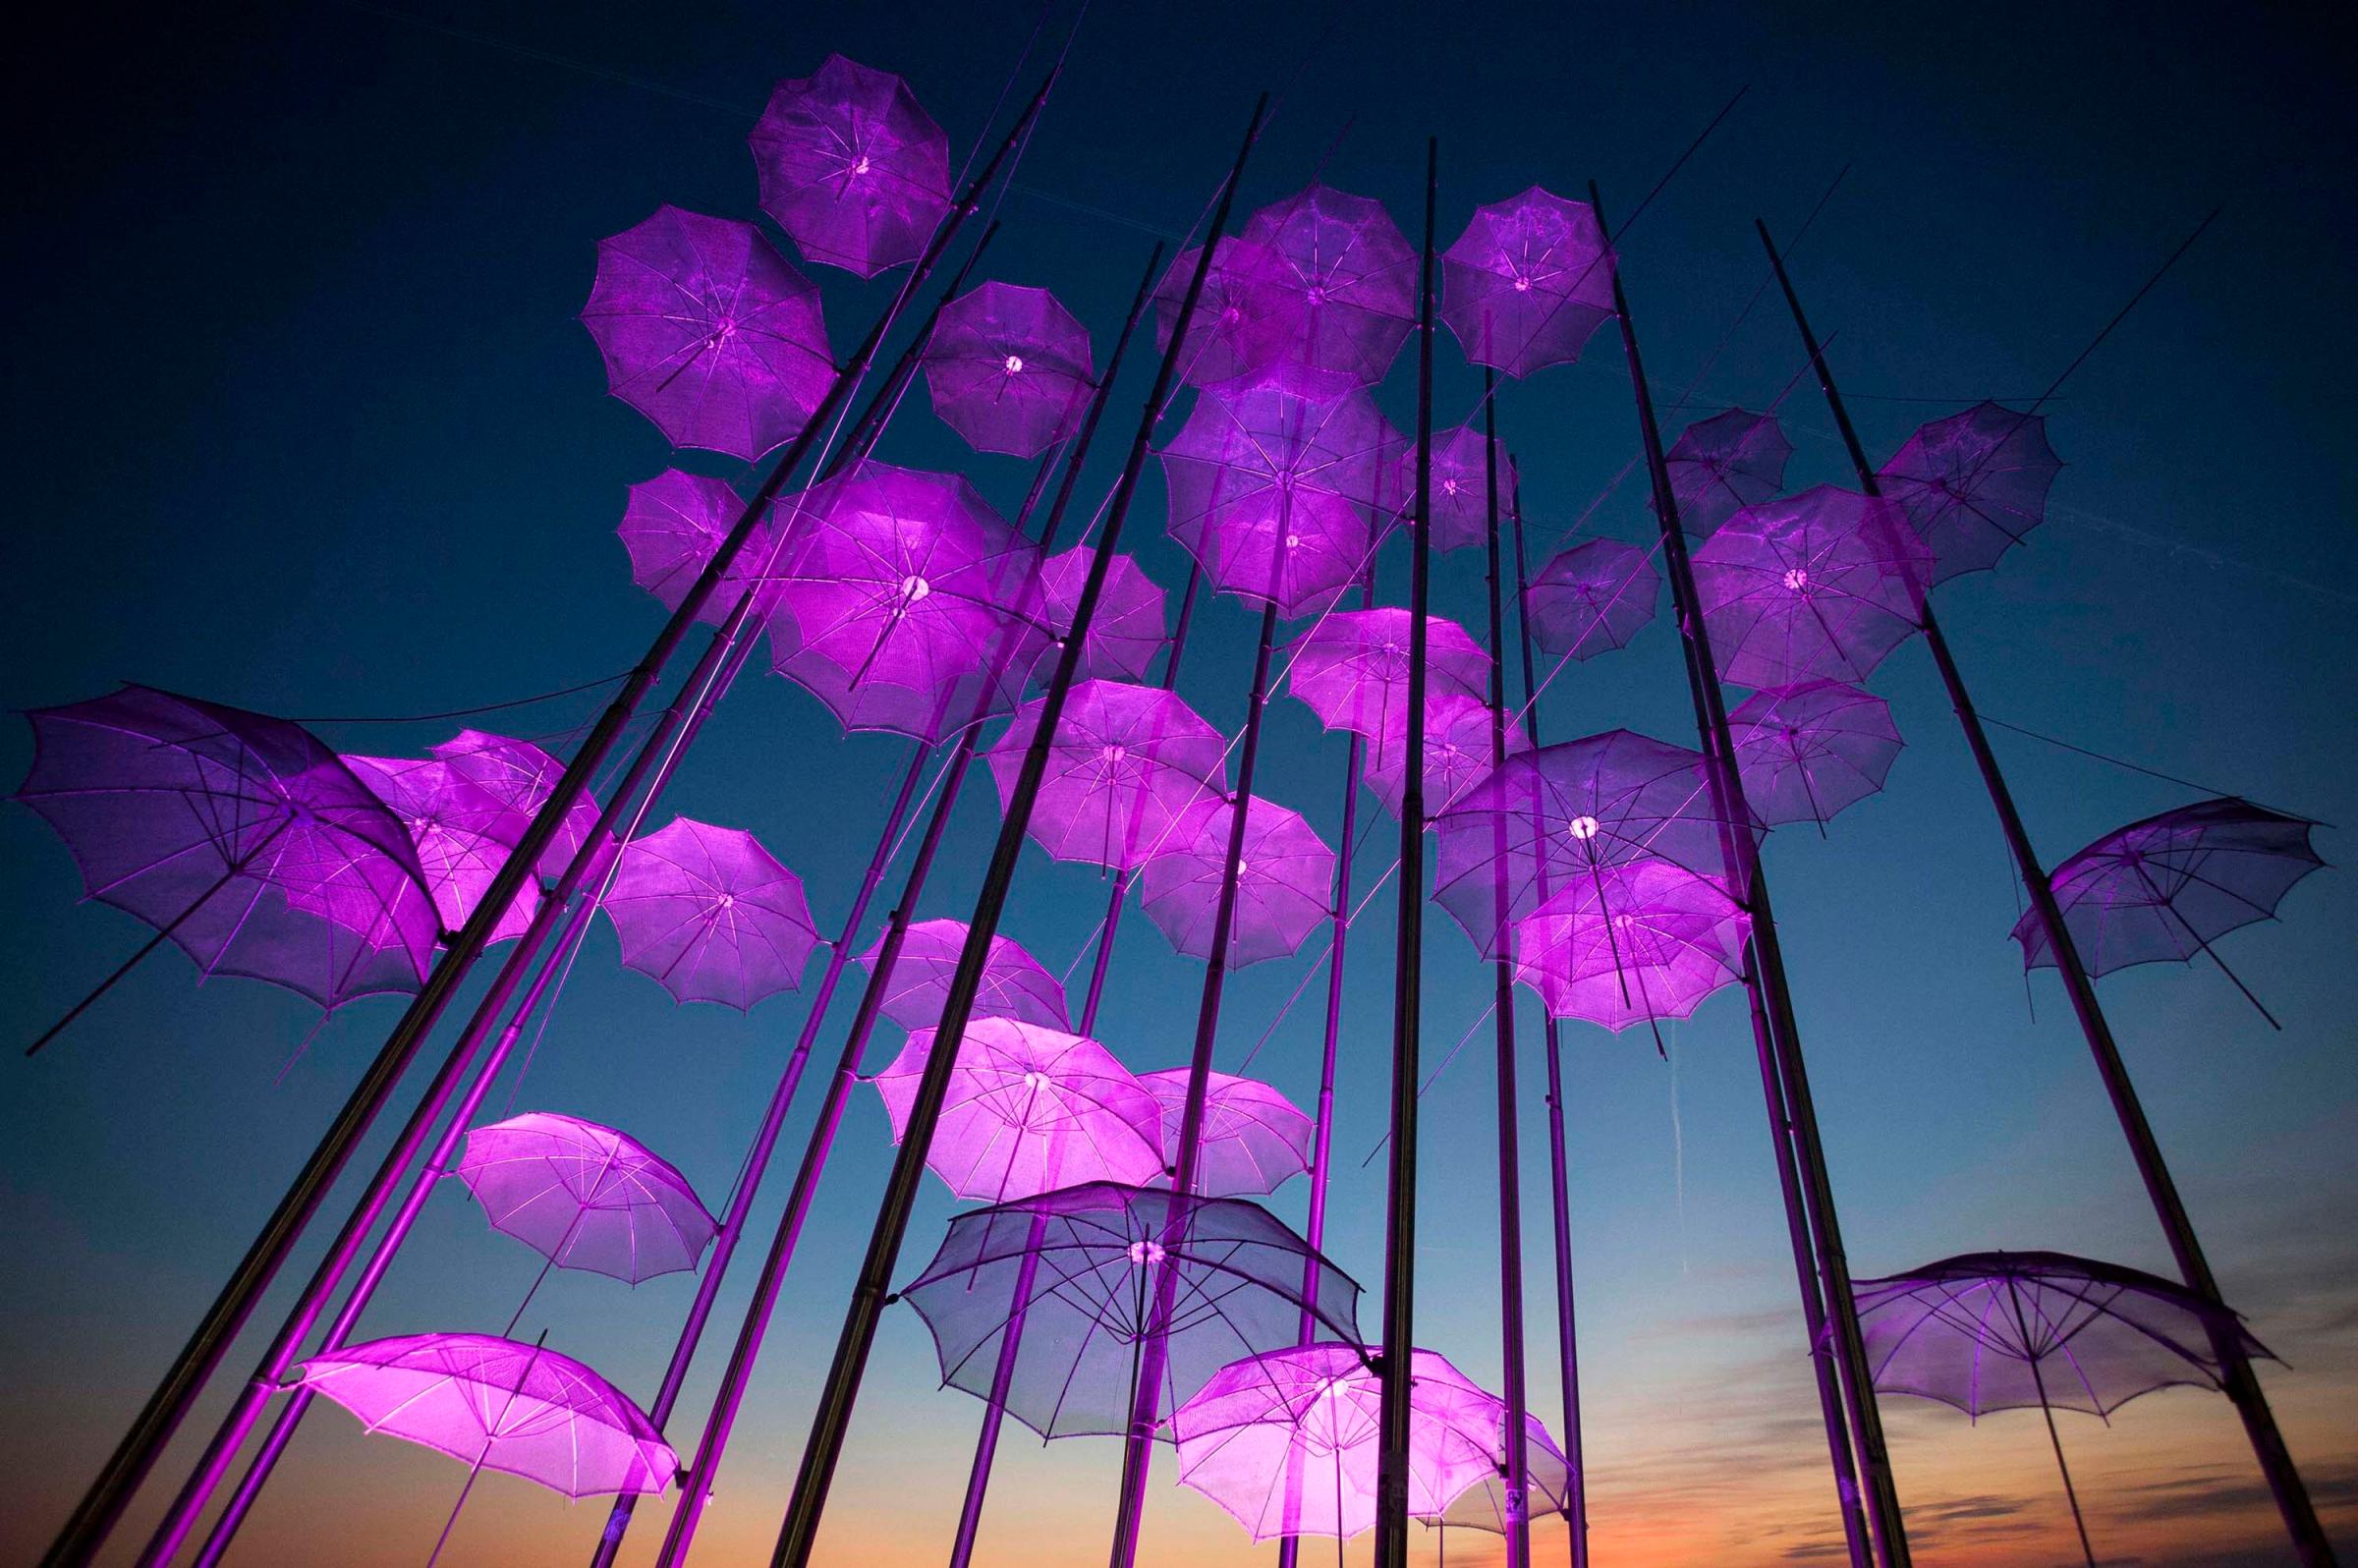 "Umbrellas", the sculpture by Giorgos Zogolopoulos is illuminated in pink light to mark Breast Cancer Awareness Month in Thessaloniki in northern Greece on Oct. 21, 2014.